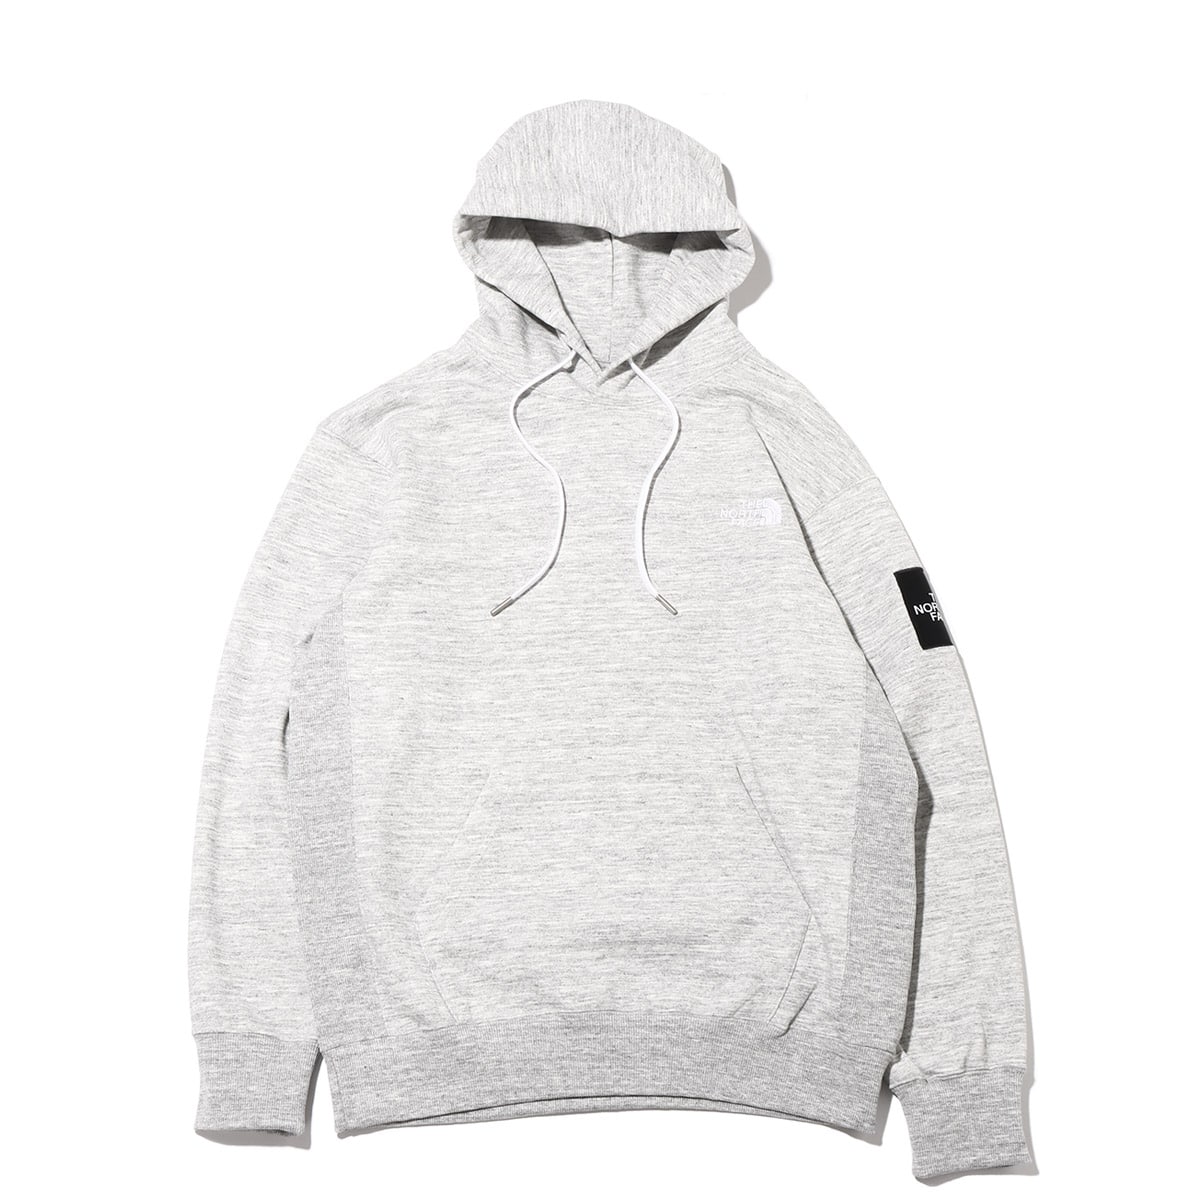 THE NORTH FACE SQUARE LOGO HOODIE ミックスグレー 23SS-I